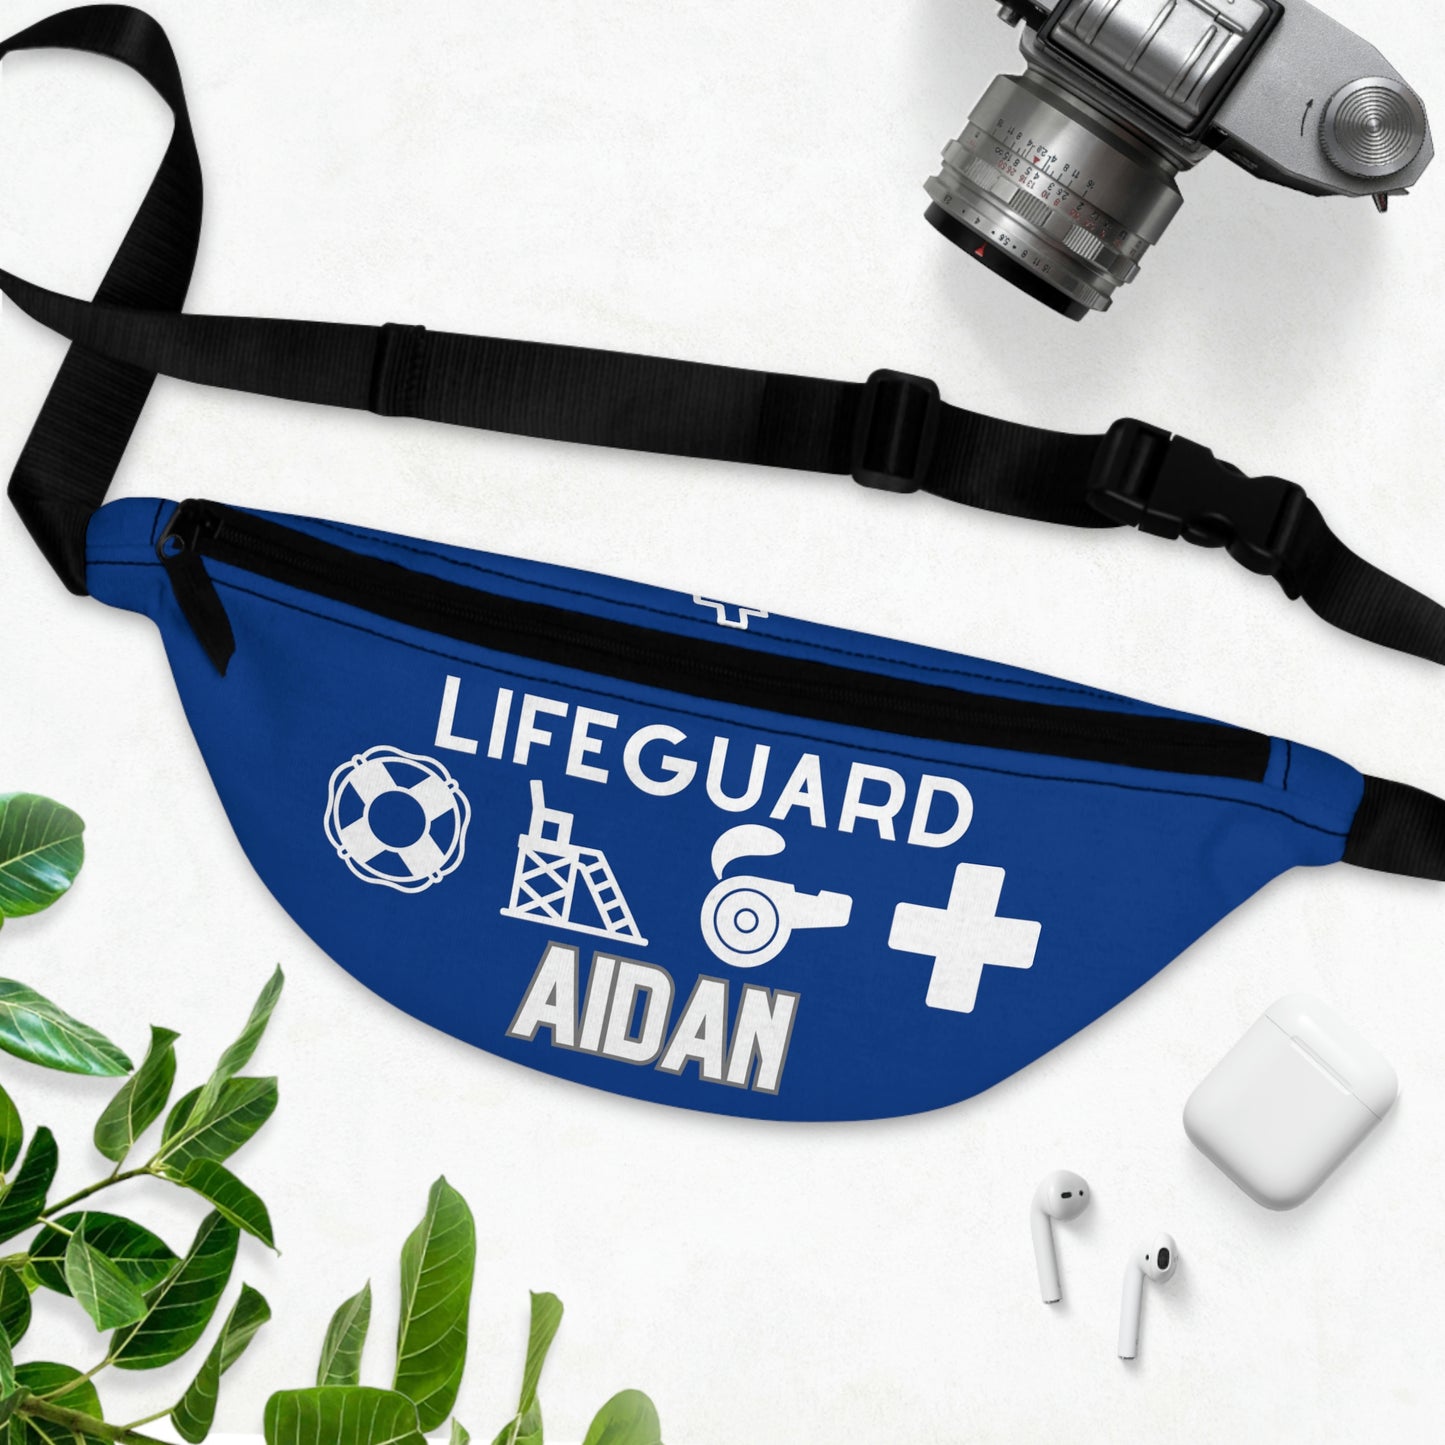 Lifeguard Fanny Pack, Blue Personalized